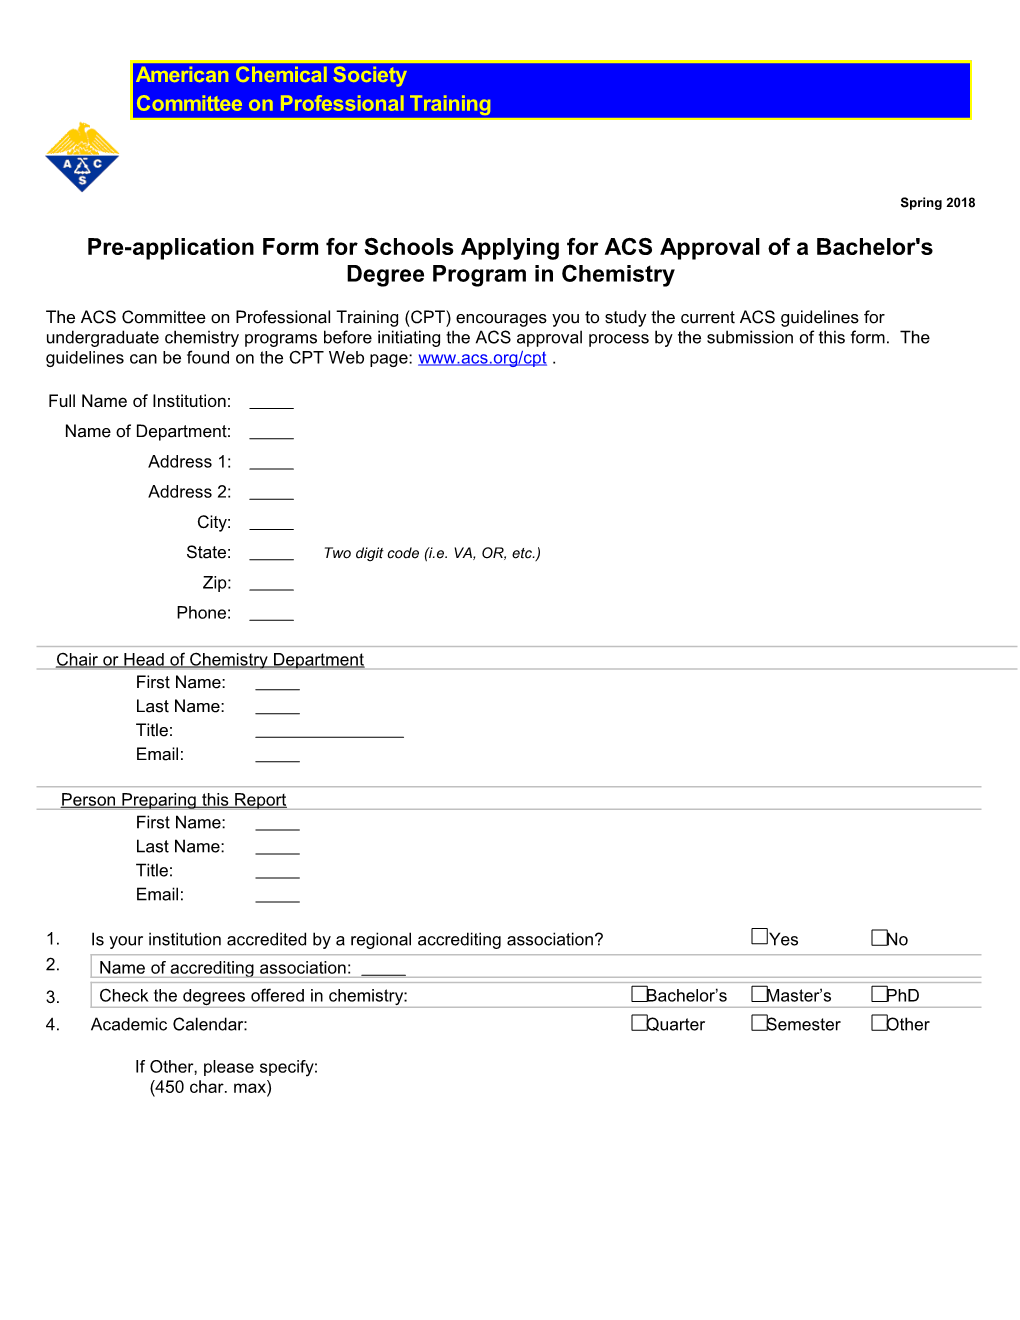 Pre-Application Form for Schools Applying for ACS Approval of a Bachelor's Degree Program